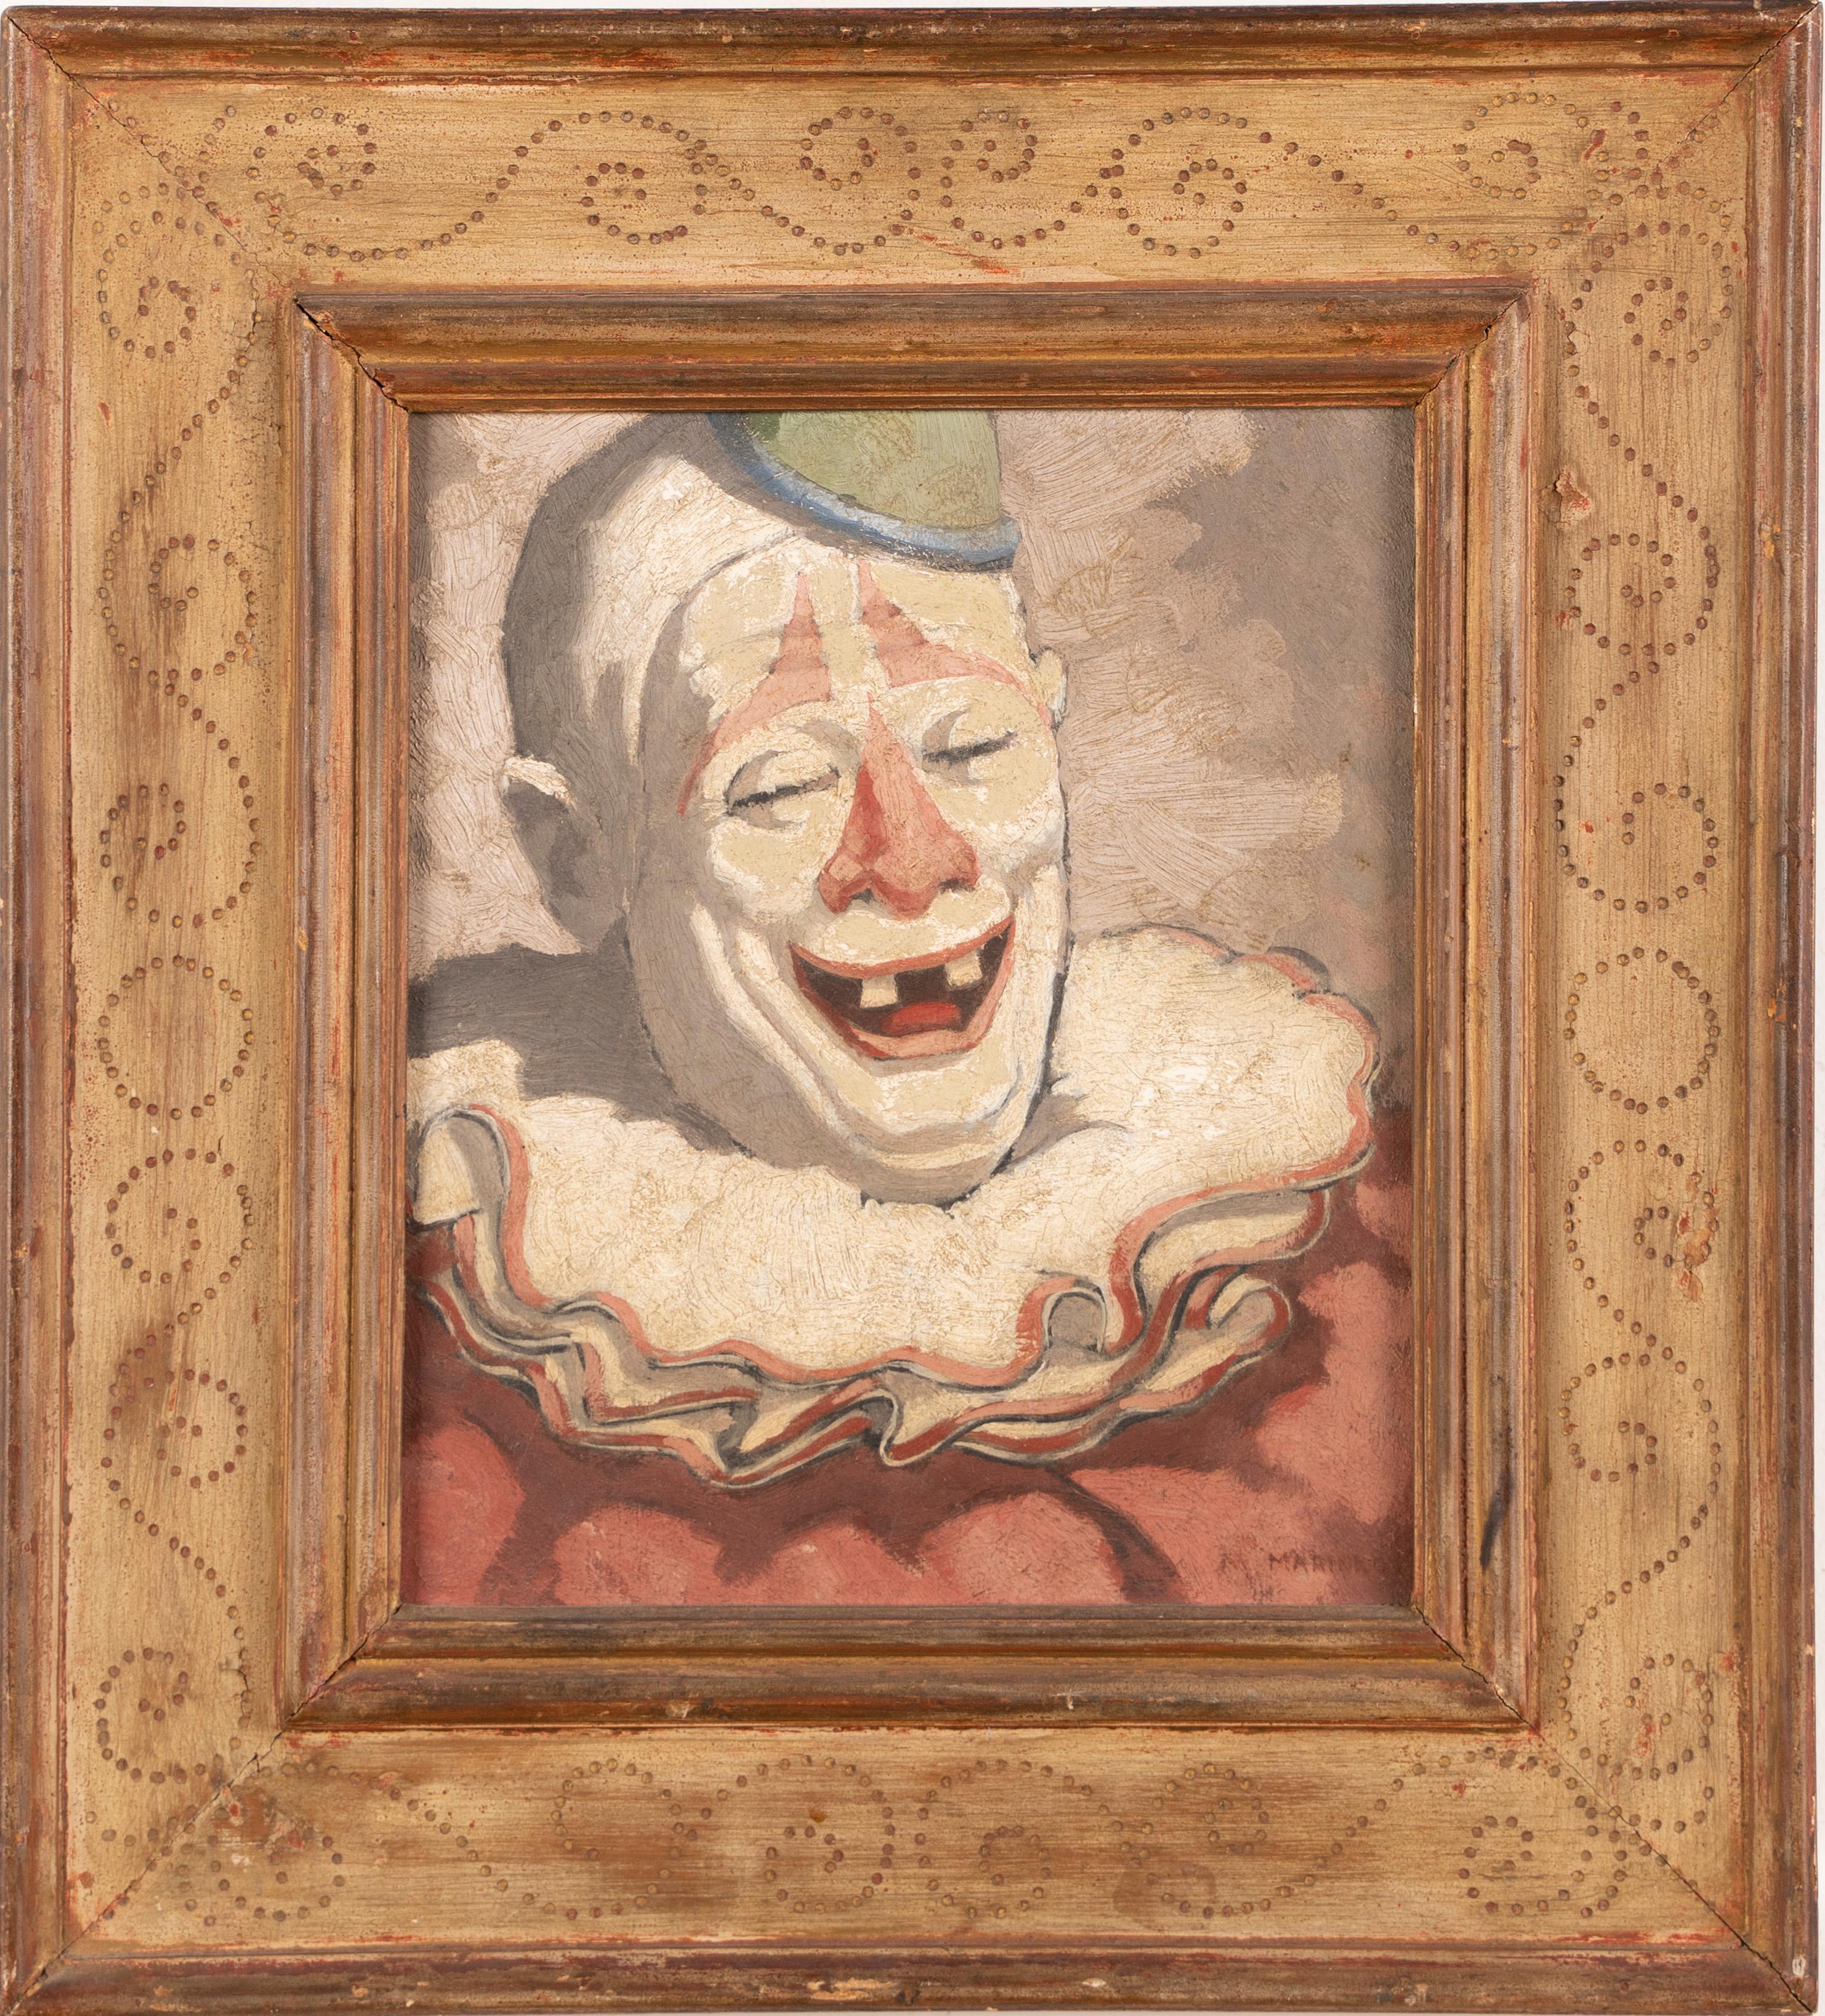 Unknown Portrait Painting - Antique American Modernist Clown Portrait Signed Framed Circus Oil Painting 